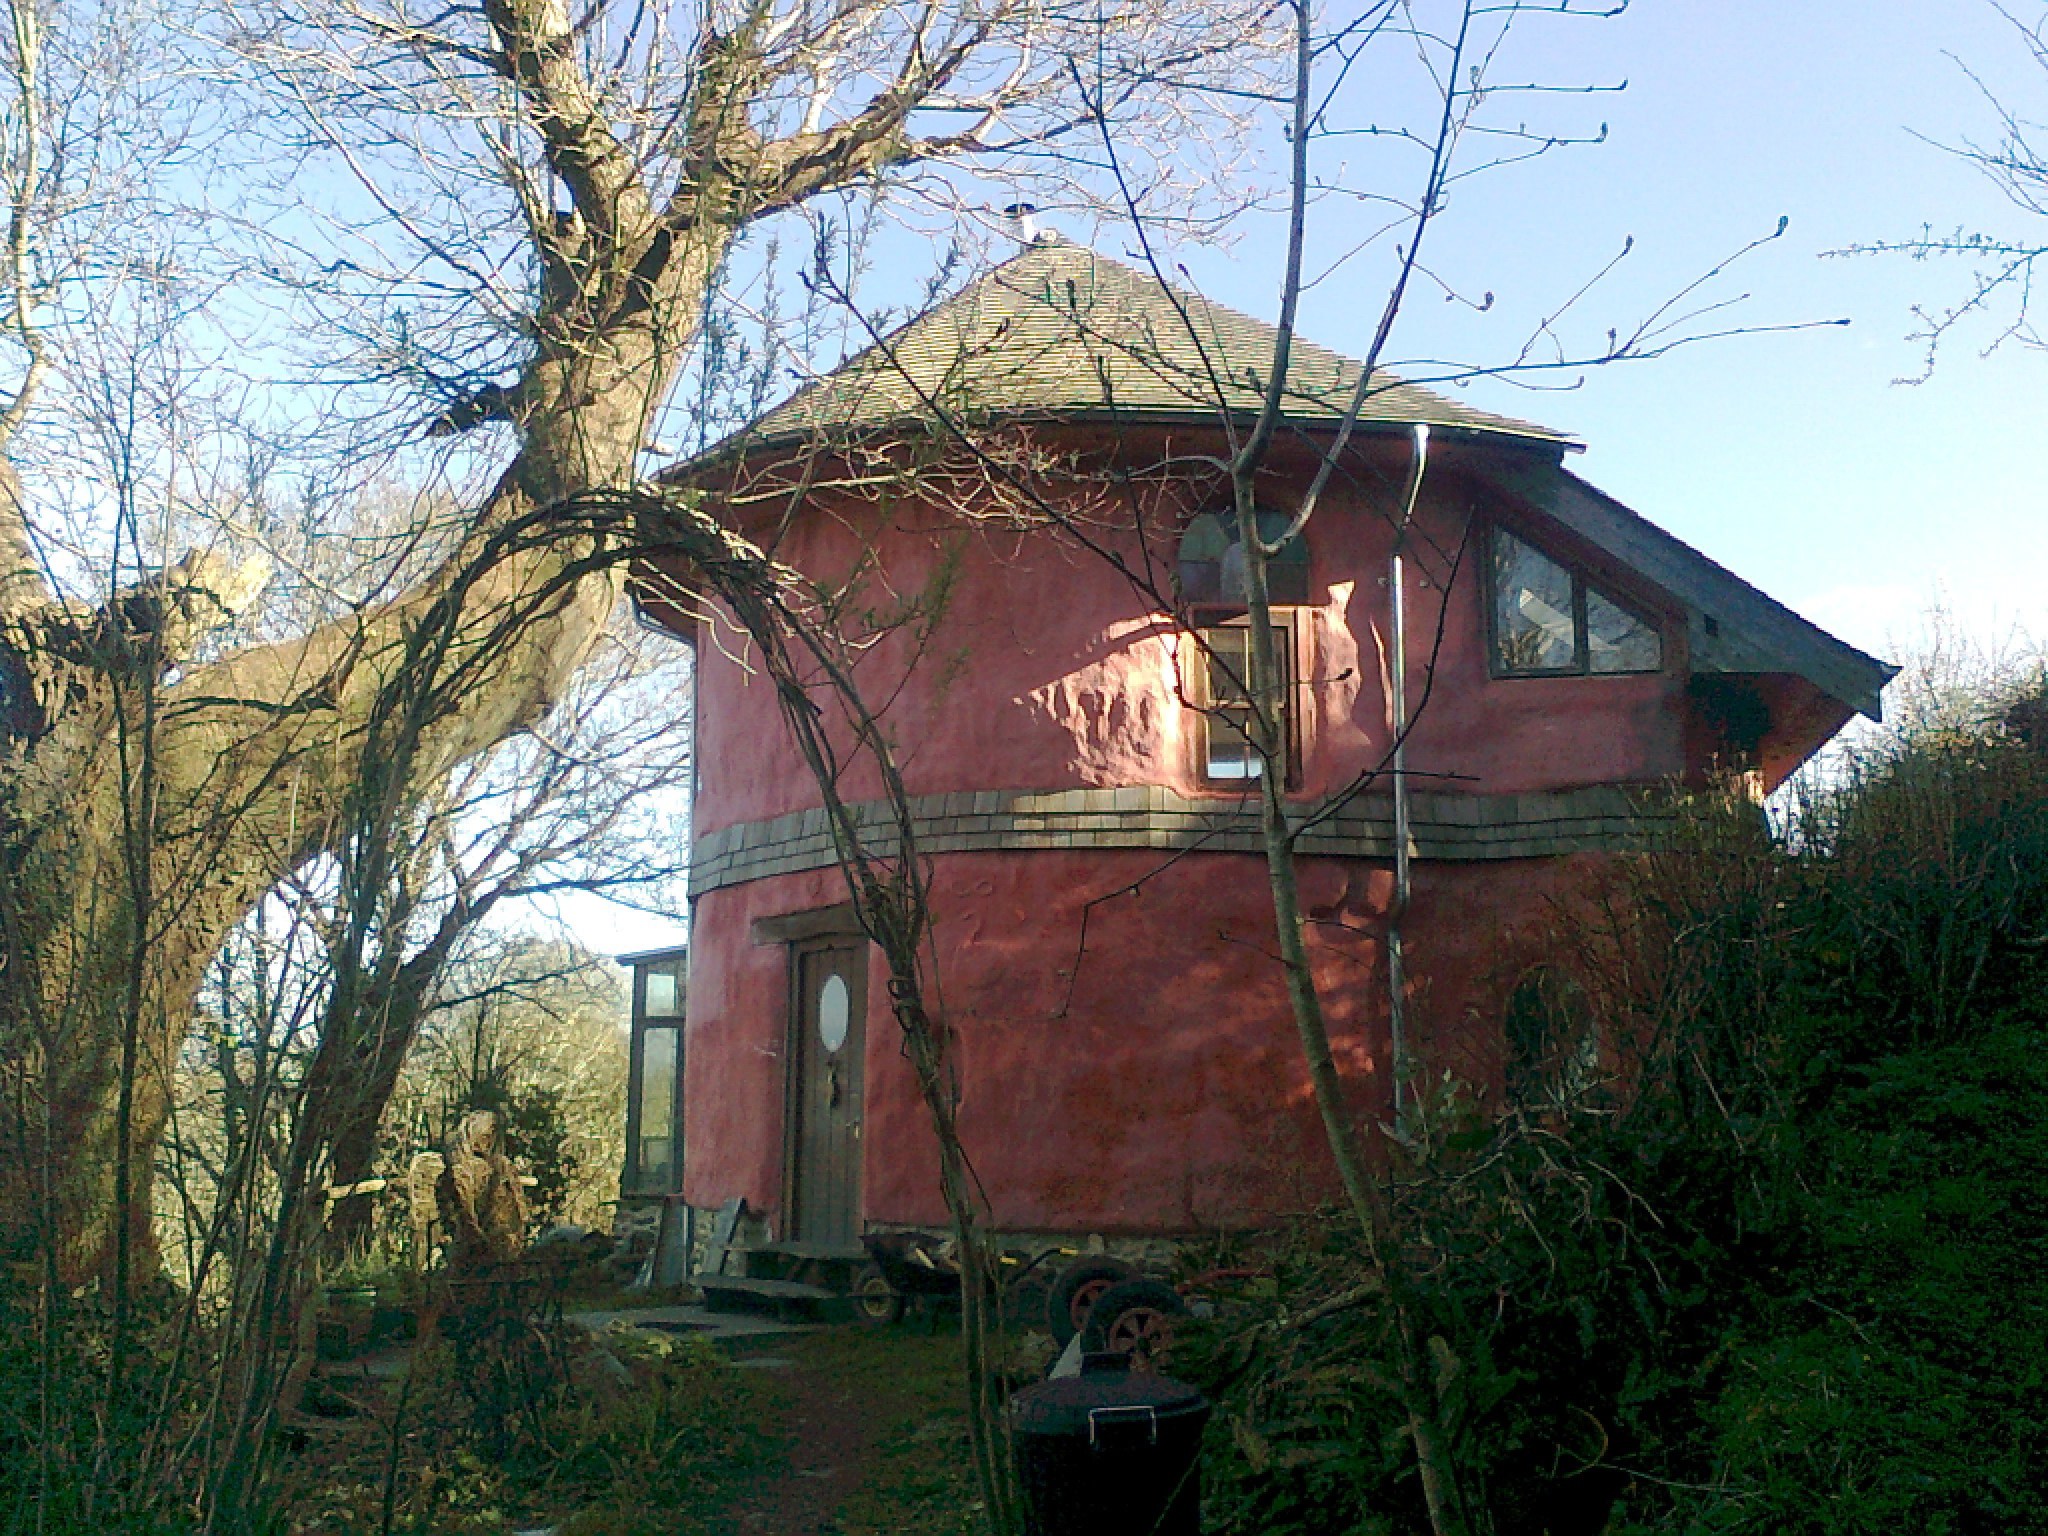 Rachel's sustainable Eco House St. Dogmaels Pembrokeshire is a cylindrically shaped building painted a clay red.